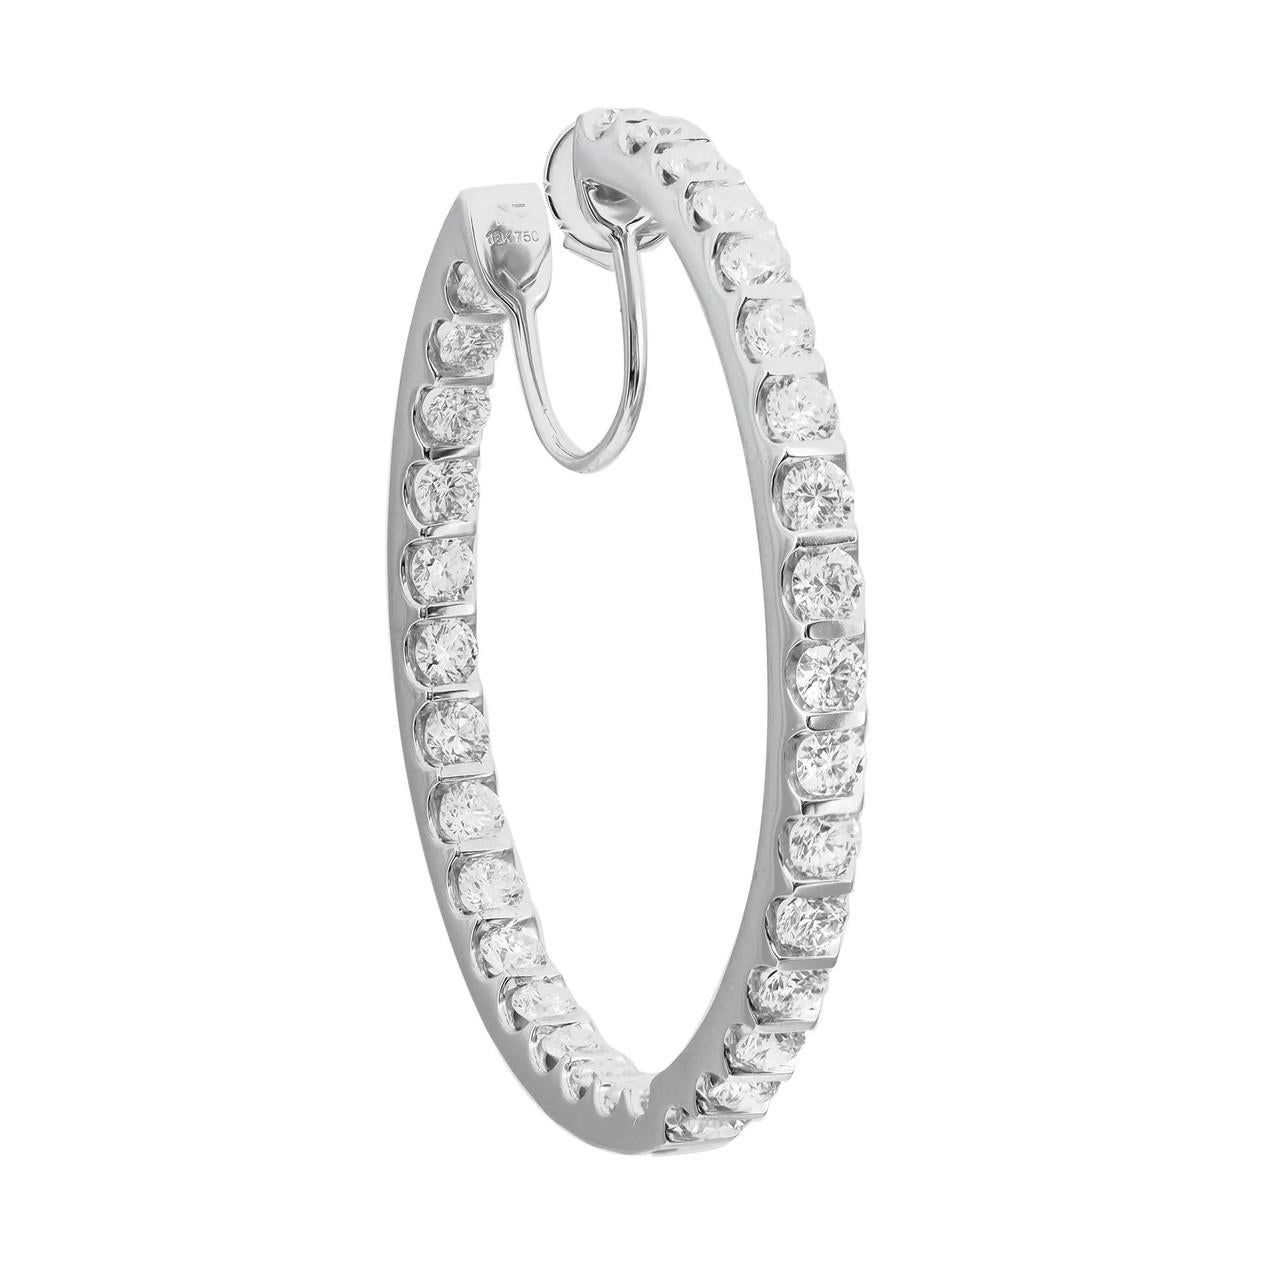 Enhance your ensemble with the exquisite allure of these radiant diamond inside-out hoop earrings. Meticulously fashioned in opulent 18K white gold, each earring emanates brilliance from every perspective, adorned with a dazzling array of round